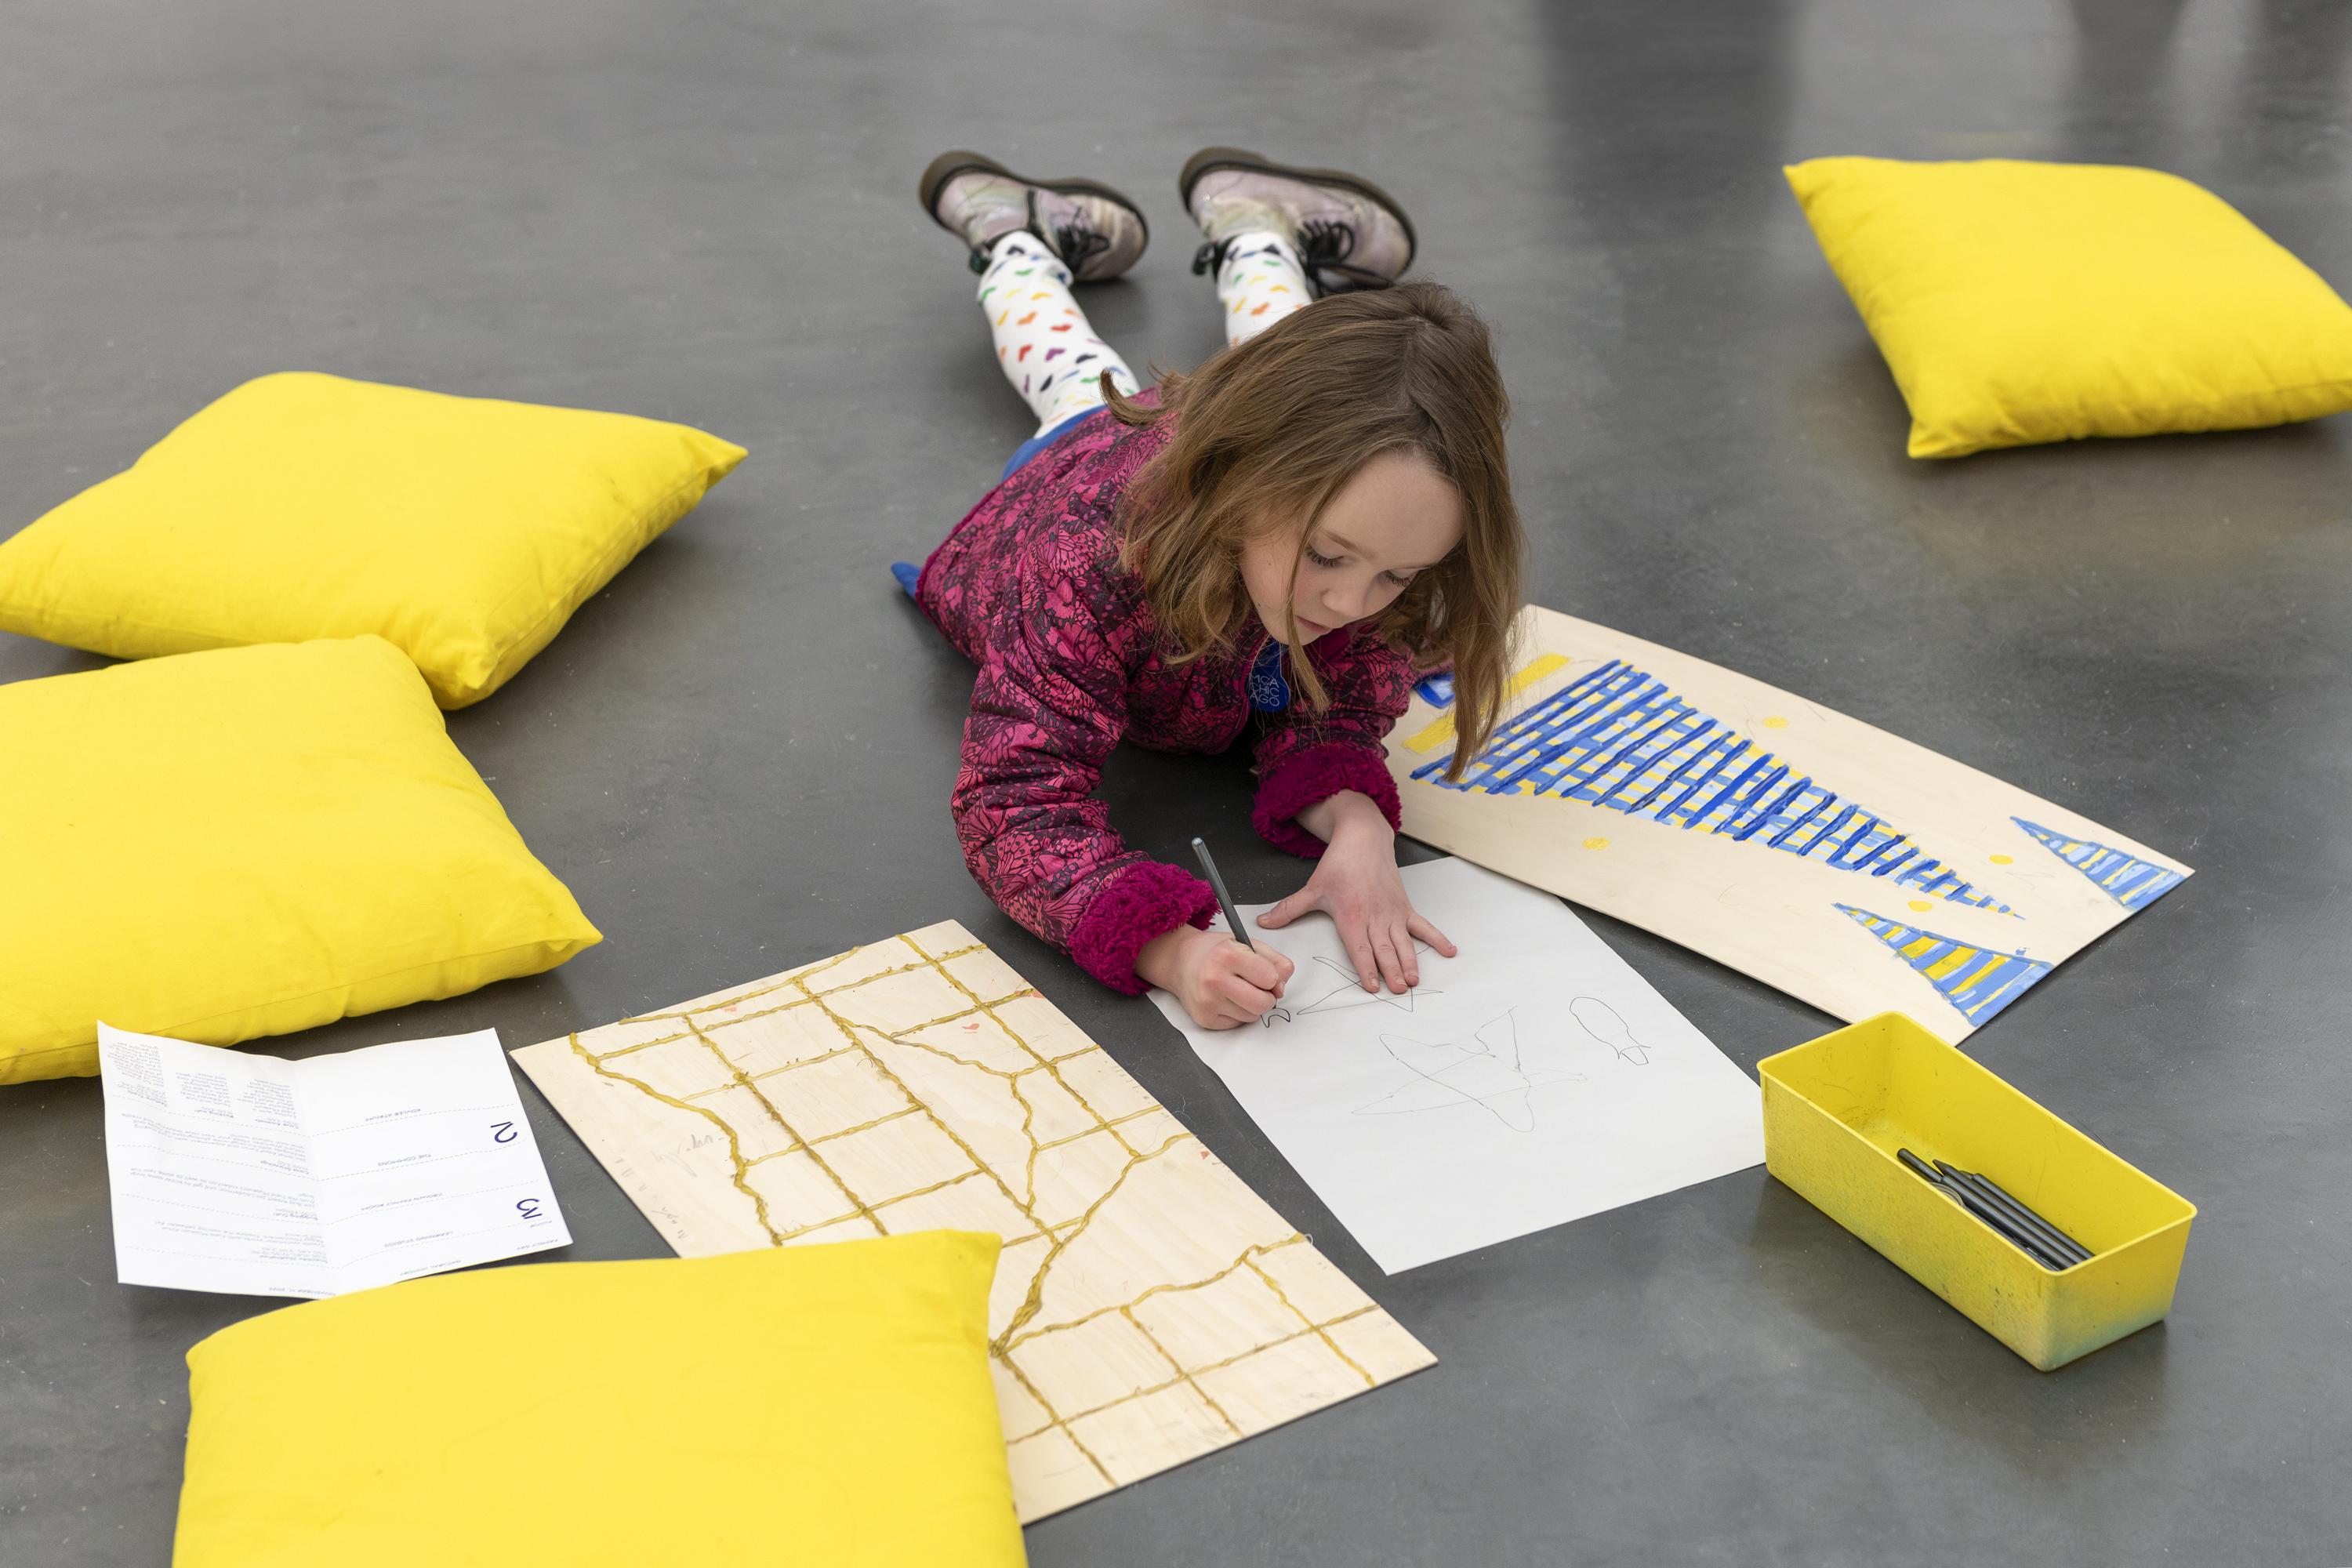 A child lays on a concrete floor while coloring, surrounded by yellow pillows and pieces of paper.